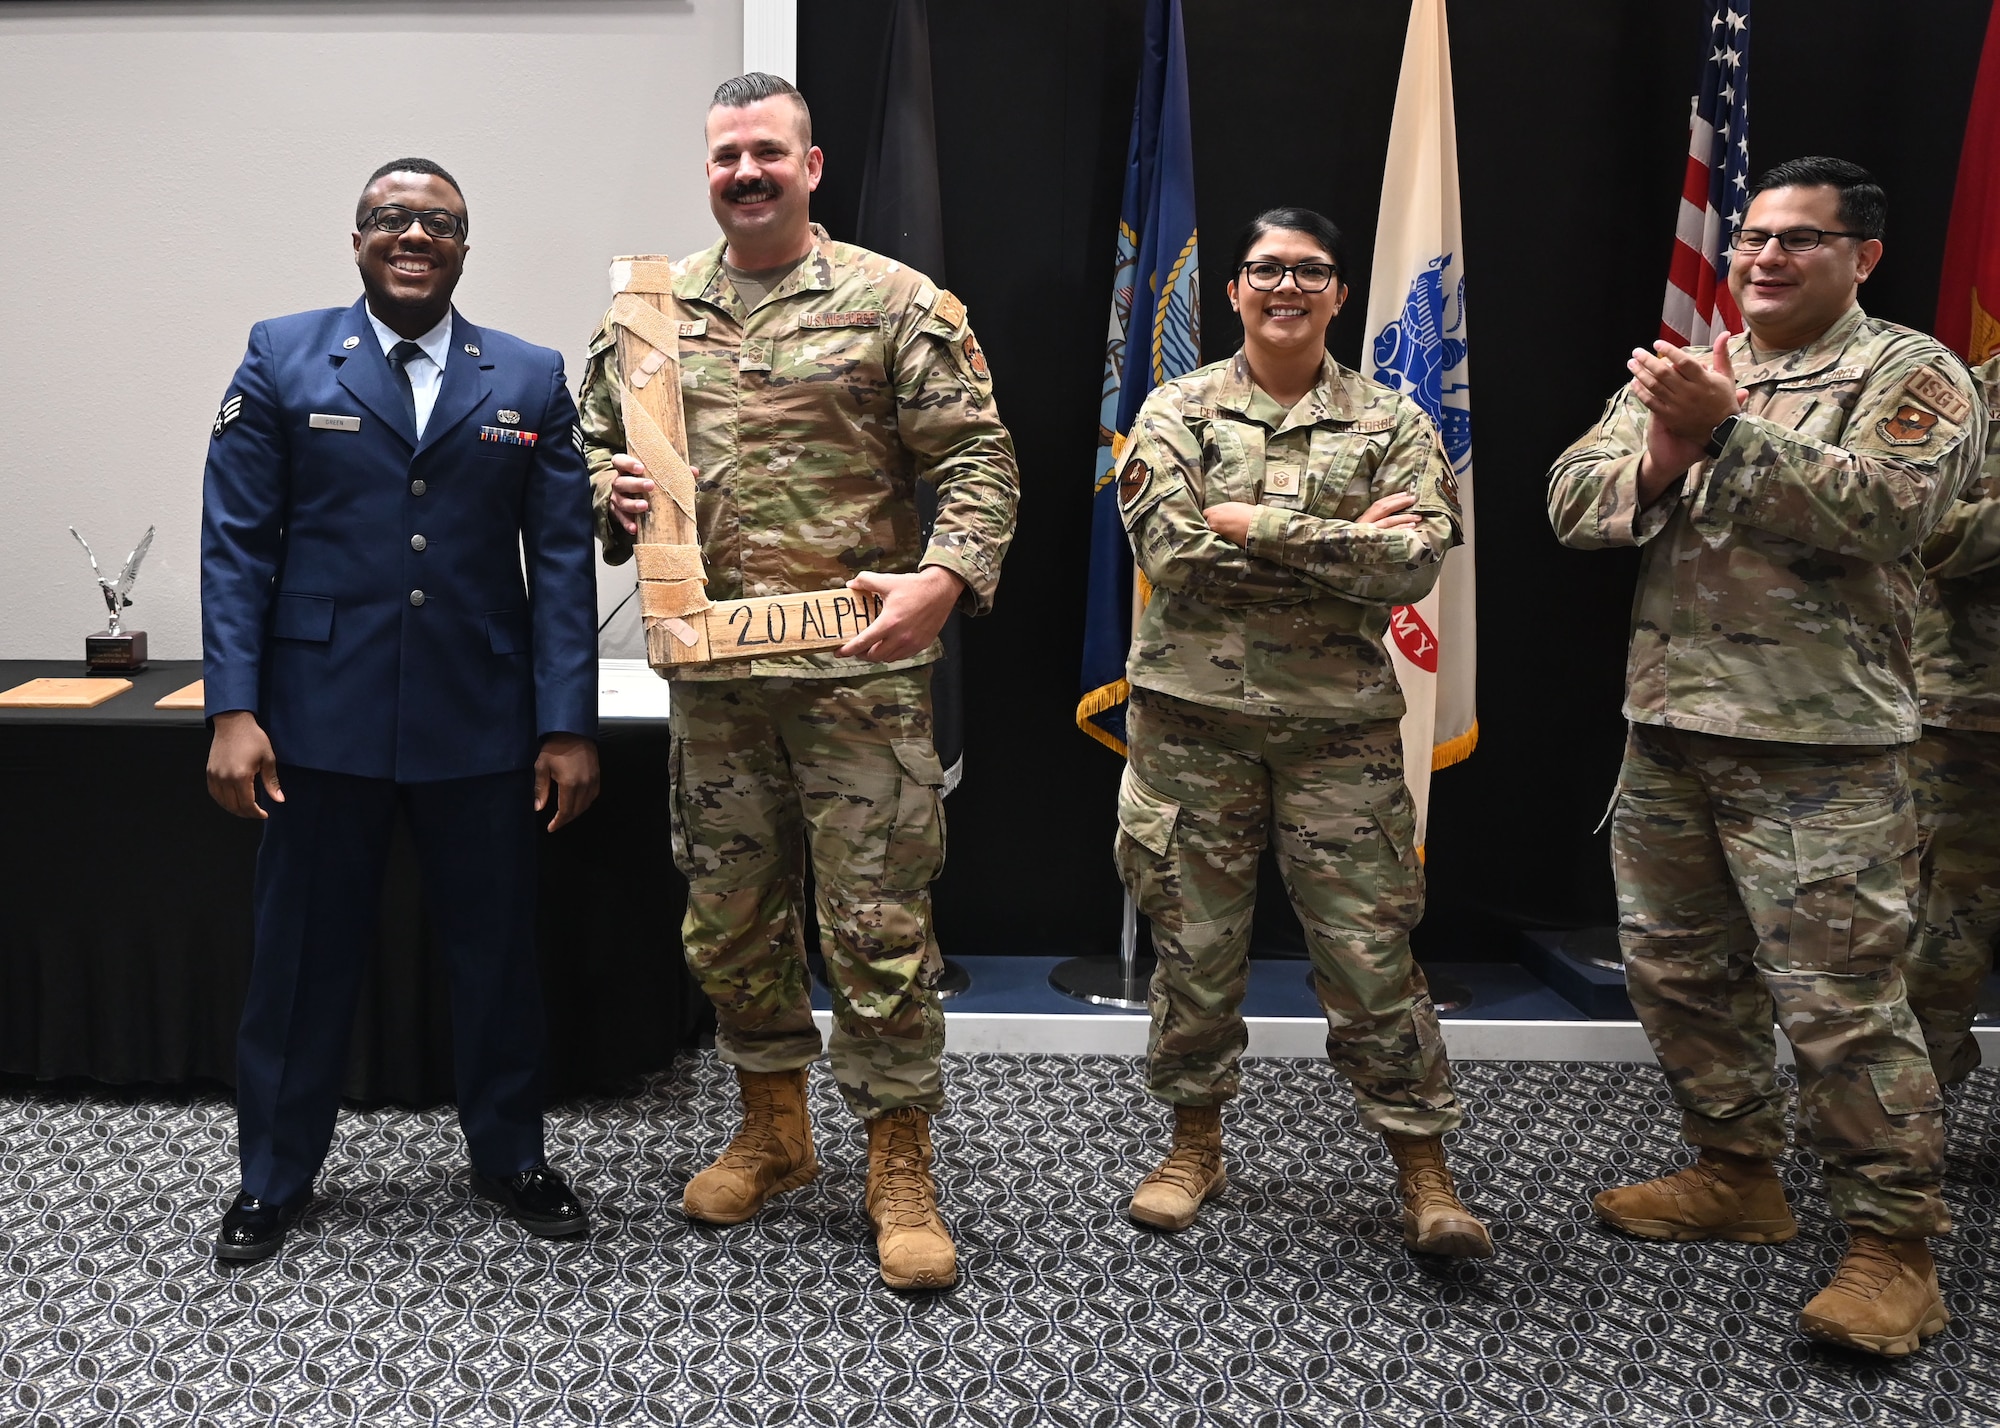 U.S. Air Force Senior Airman Steven Green II, Class 23-E Airman Leadership School graduate, presents the “L” to a group of first sergeants belonging to the 17th Training Wing at the Class 23-E ALS graduation in the Powell Event Center, Goodfellow Air Force Base, Texas, July 20, 2023. Every ALS class plays a volleyball game with the first sergeants and the winning team presents the “L” to the losing team at graduation. (U.S. Air Force photo by Senior Airman Ethan Sherwood)